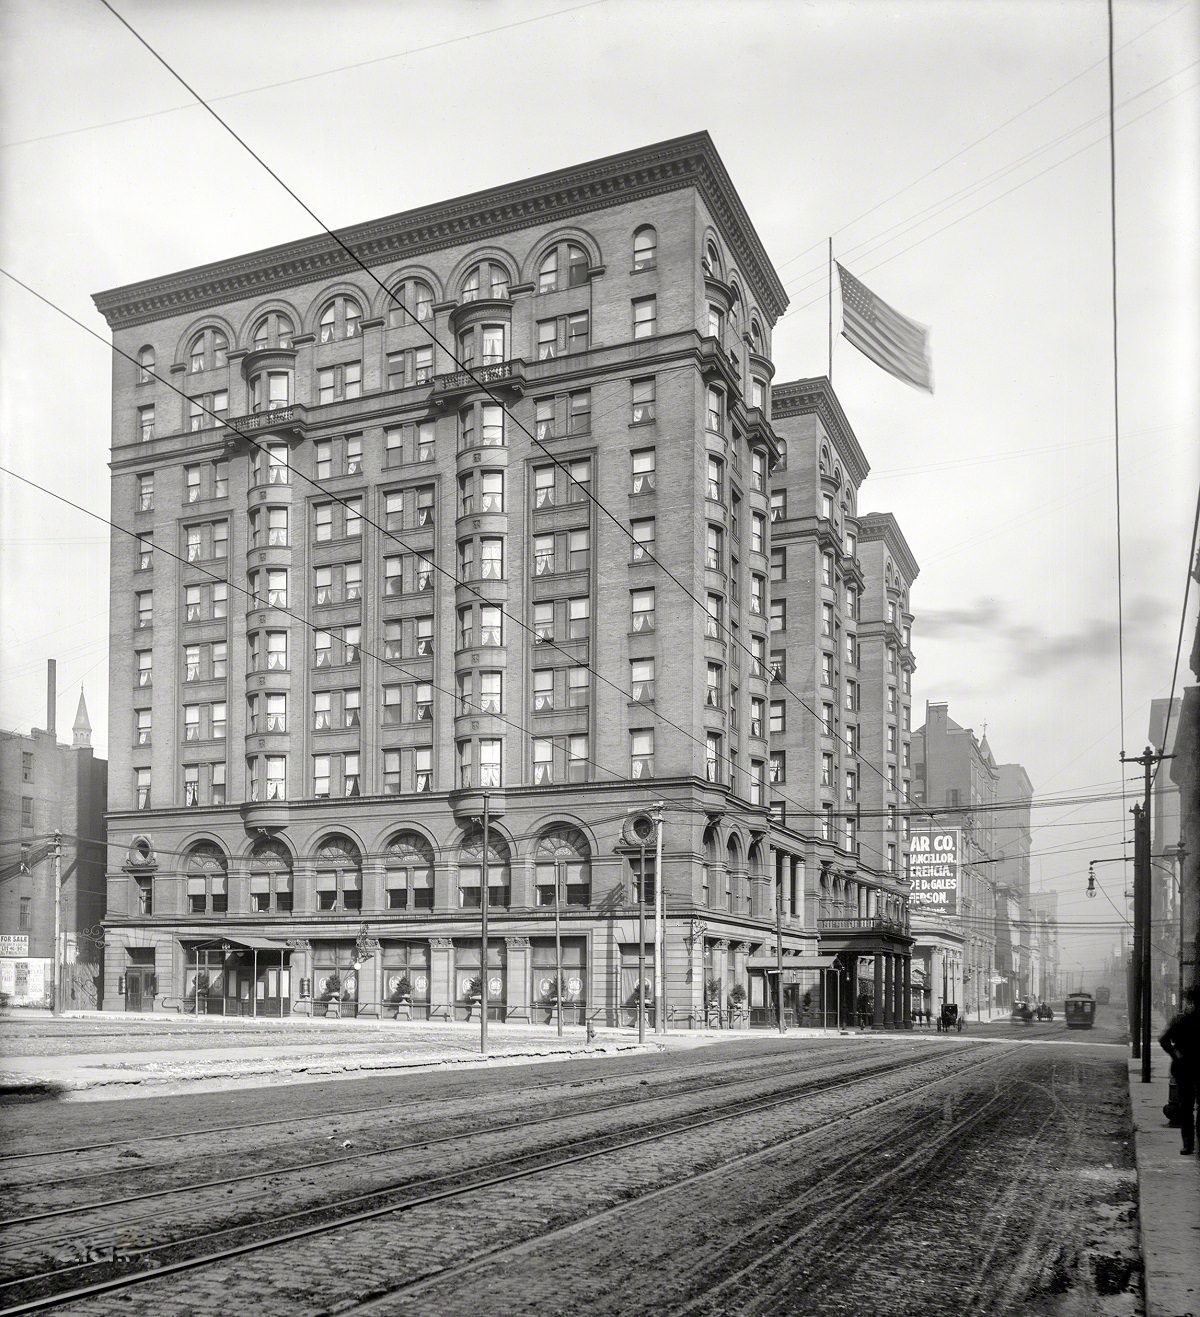 Planters Hotel, Fourth and Chestnut, St. Louis circa 1901.